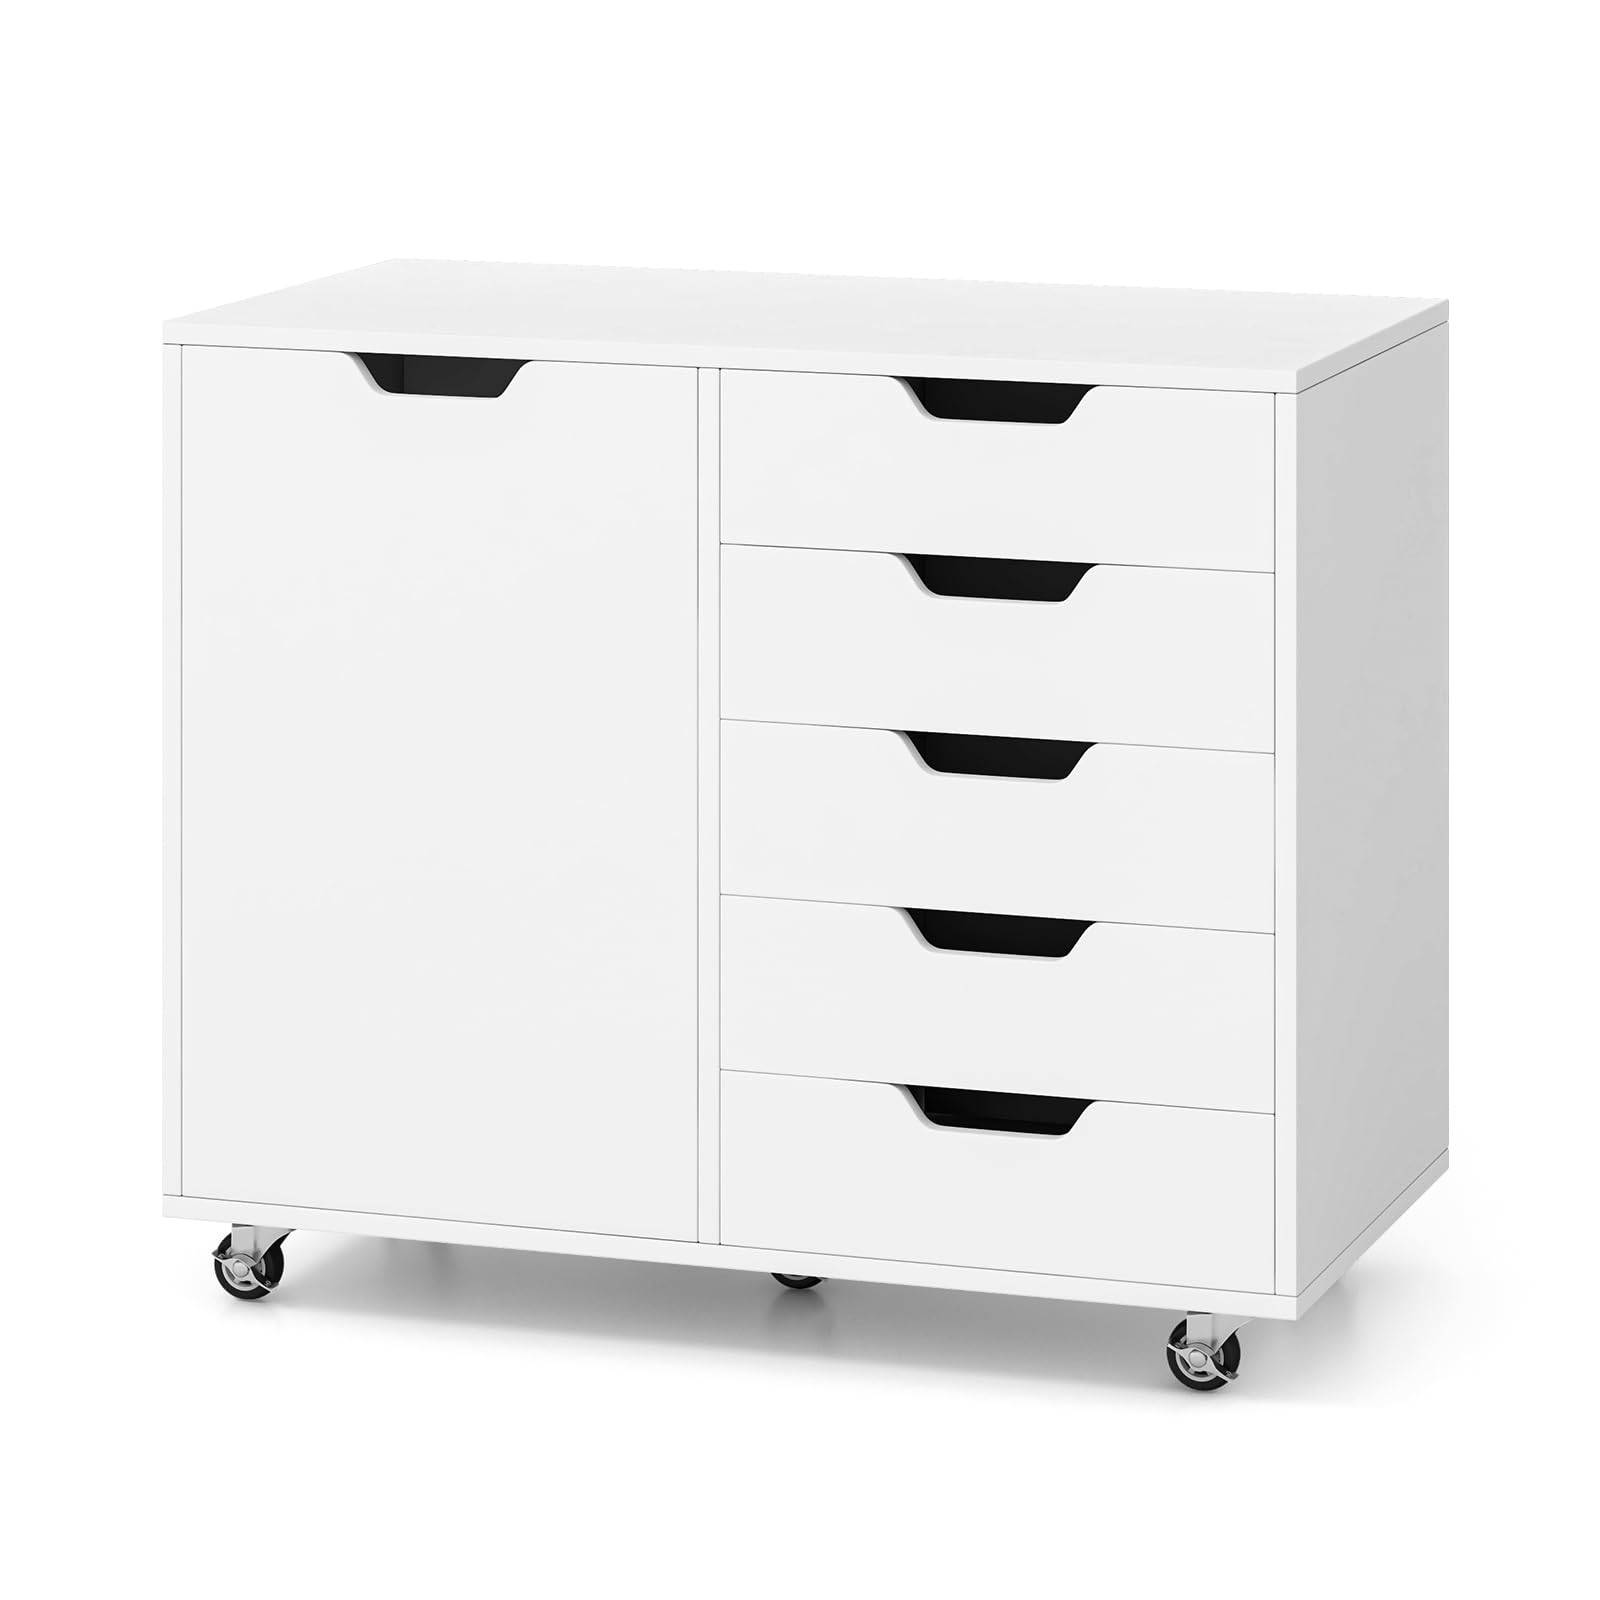 Giantex Lateral File Cabinet with Shelves - 5 Drawer Office Cabinet, White